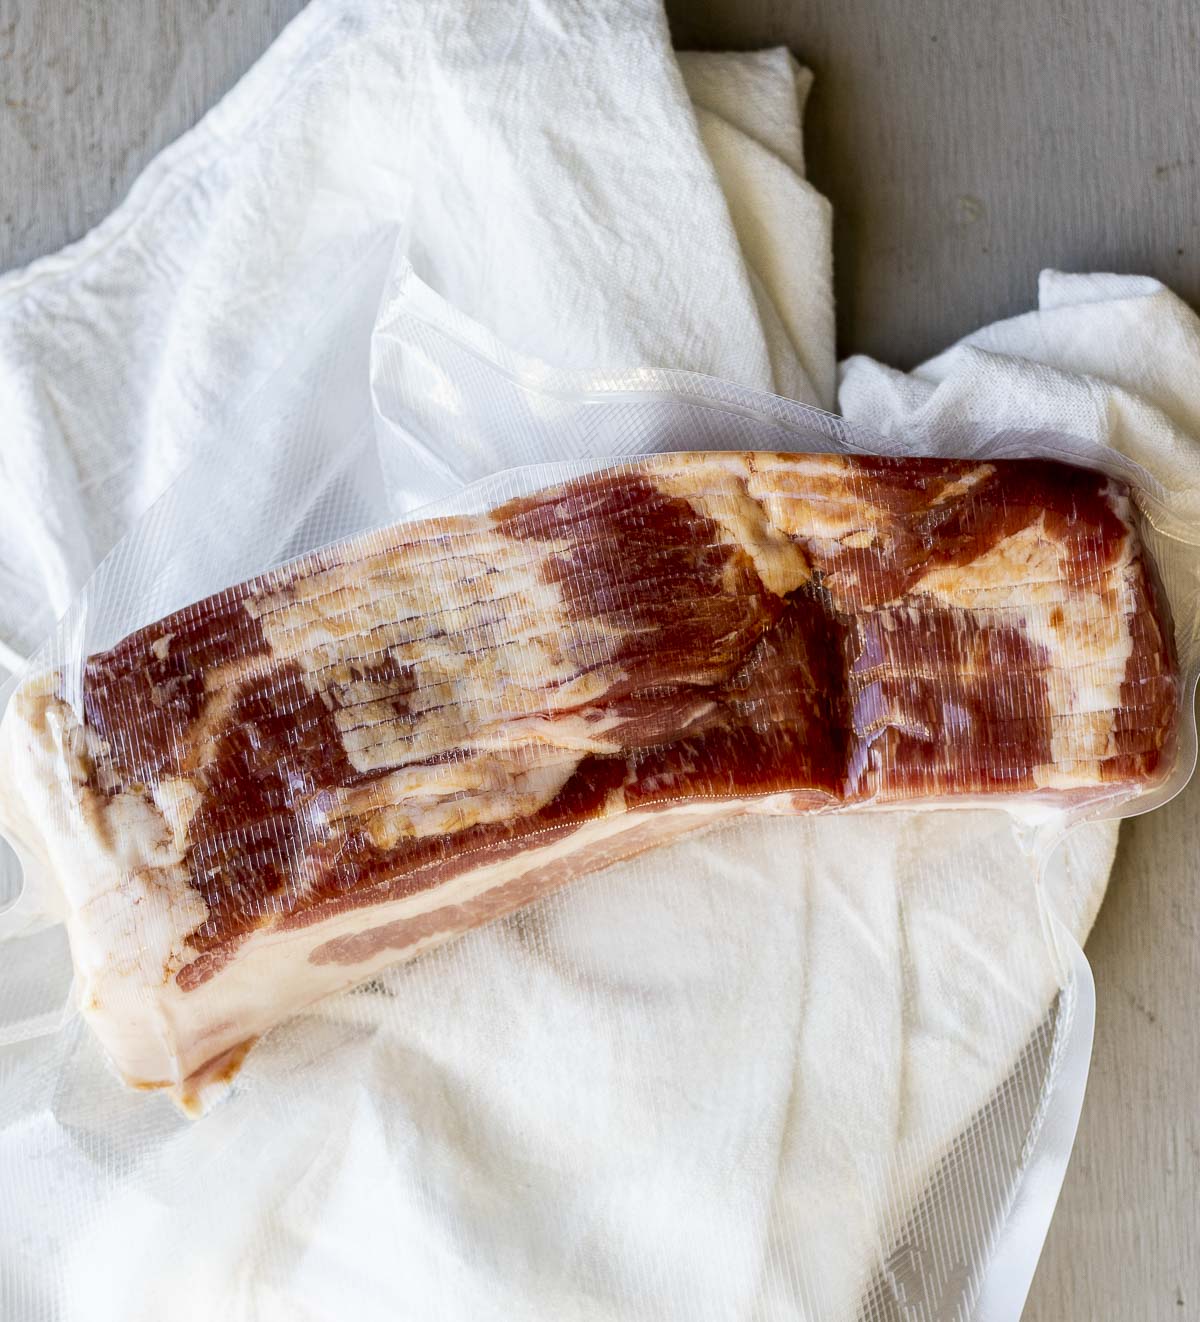 Thick cut bacon vacuum sealed in a bag.